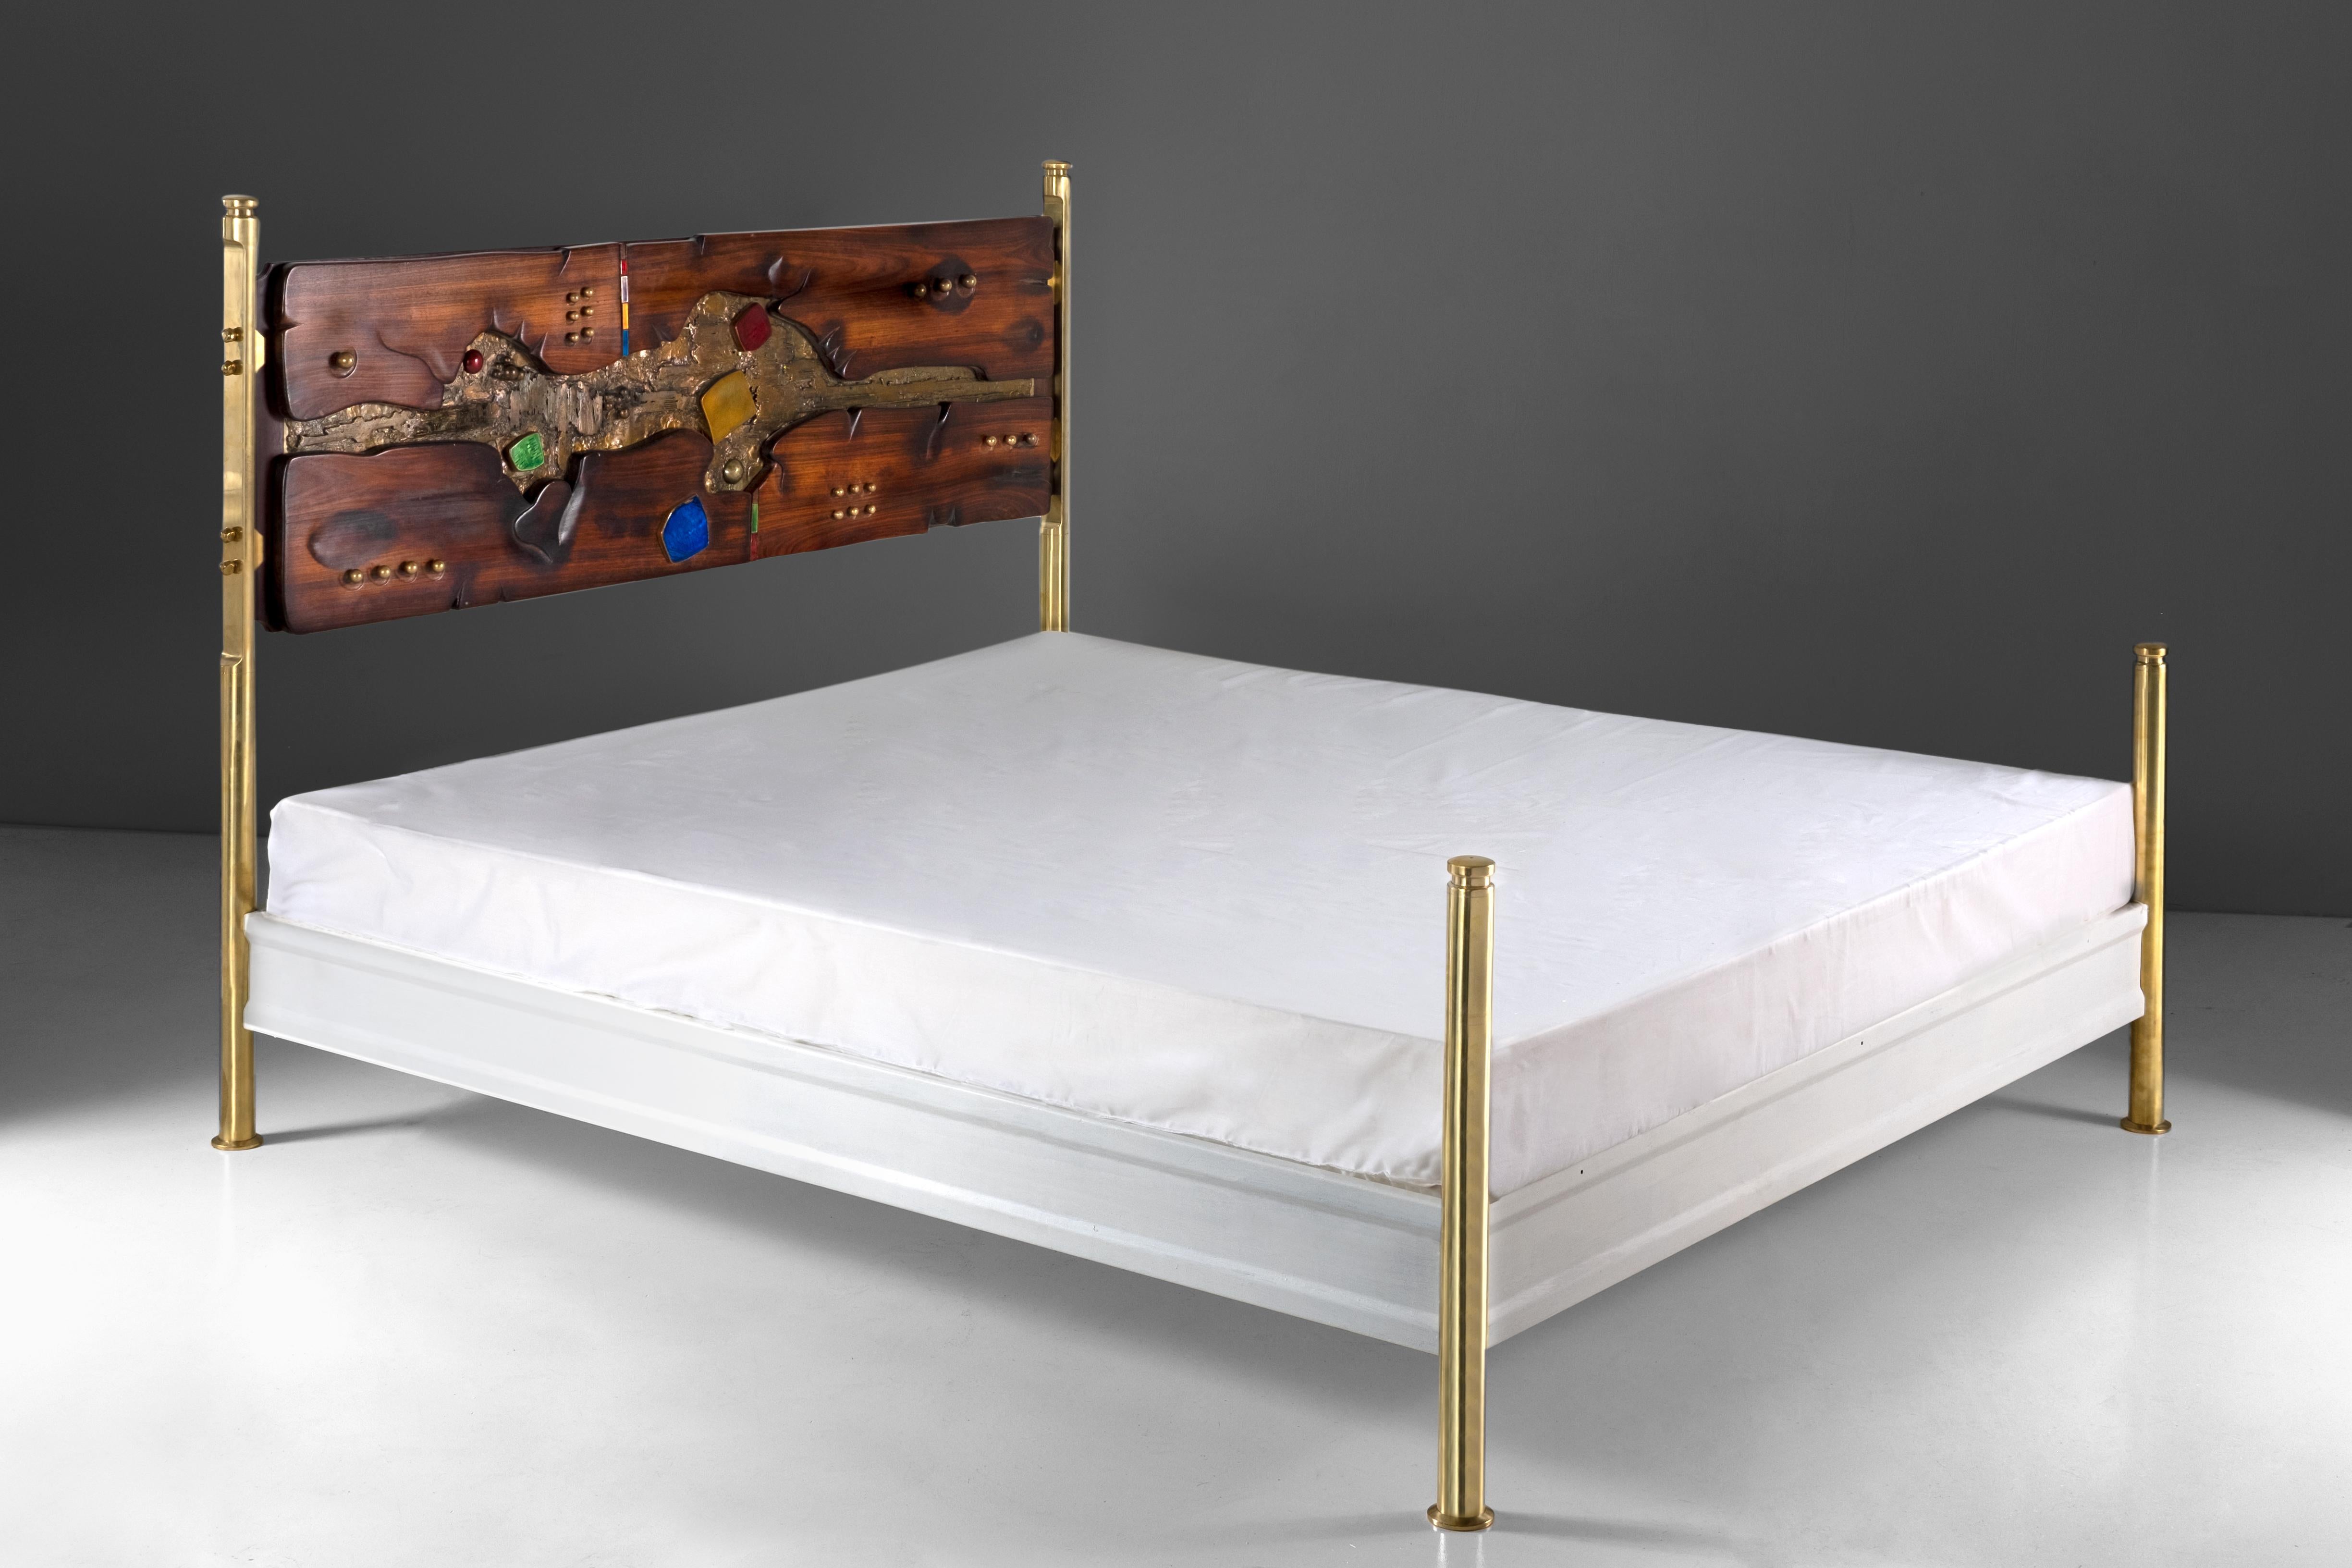 This bed is simple in its essence, composed by a metallic frame over brass feet, but the headboard is something unique: on his career, Arnaldo Pomodoro explored the decoration of furniture establishing collaboration with - among the others - Osvaldo